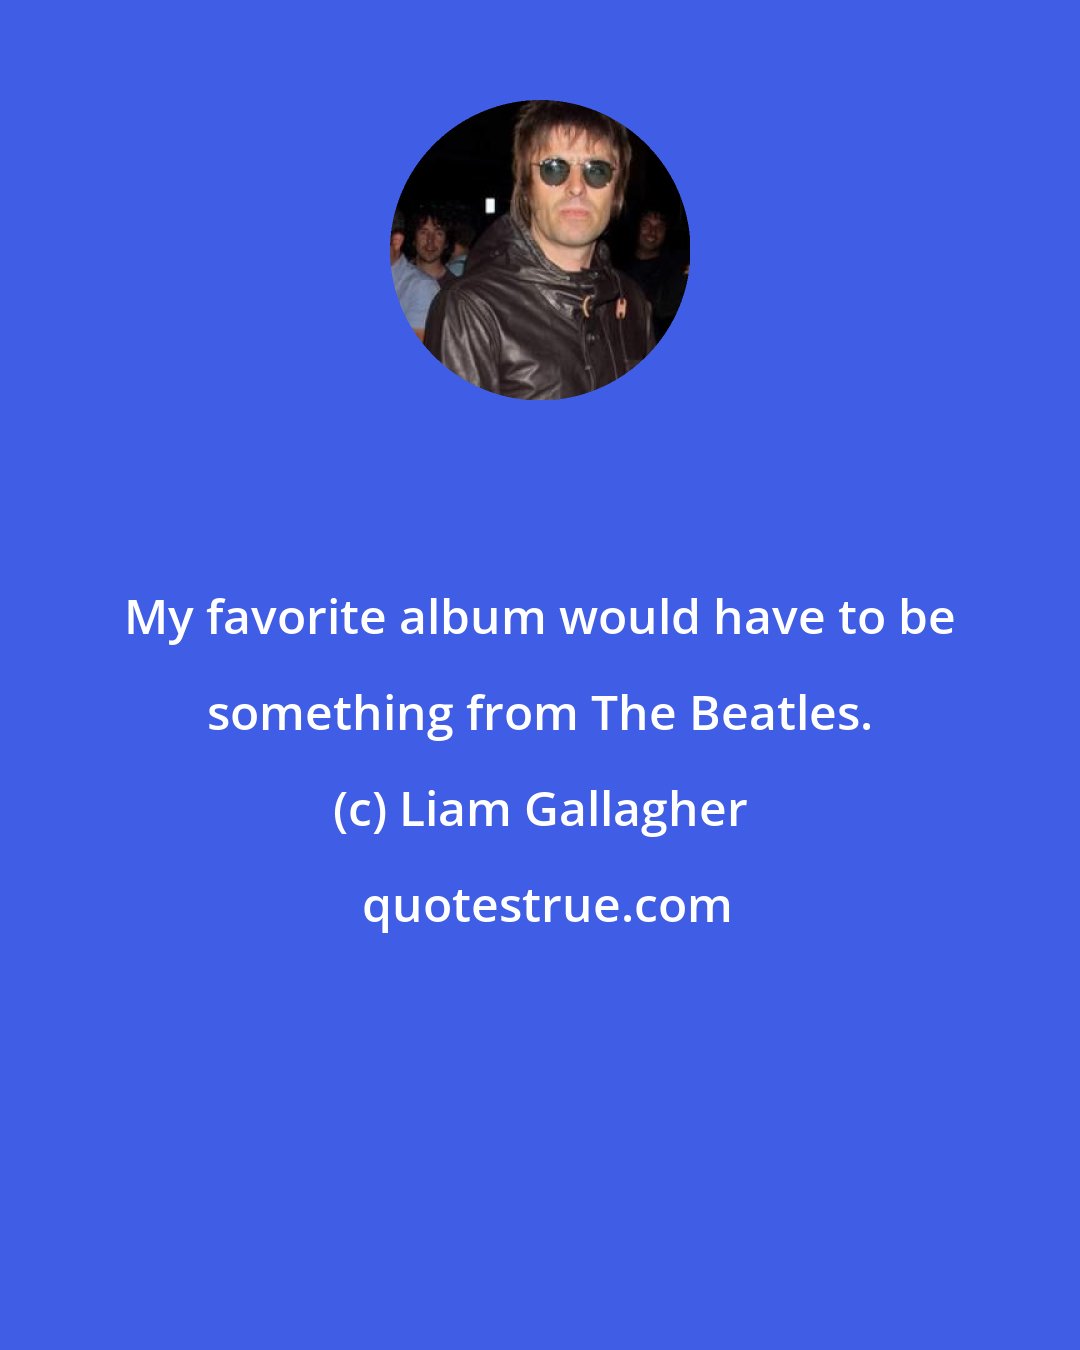 Liam Gallagher: My favorite album would have to be something from The Beatles.